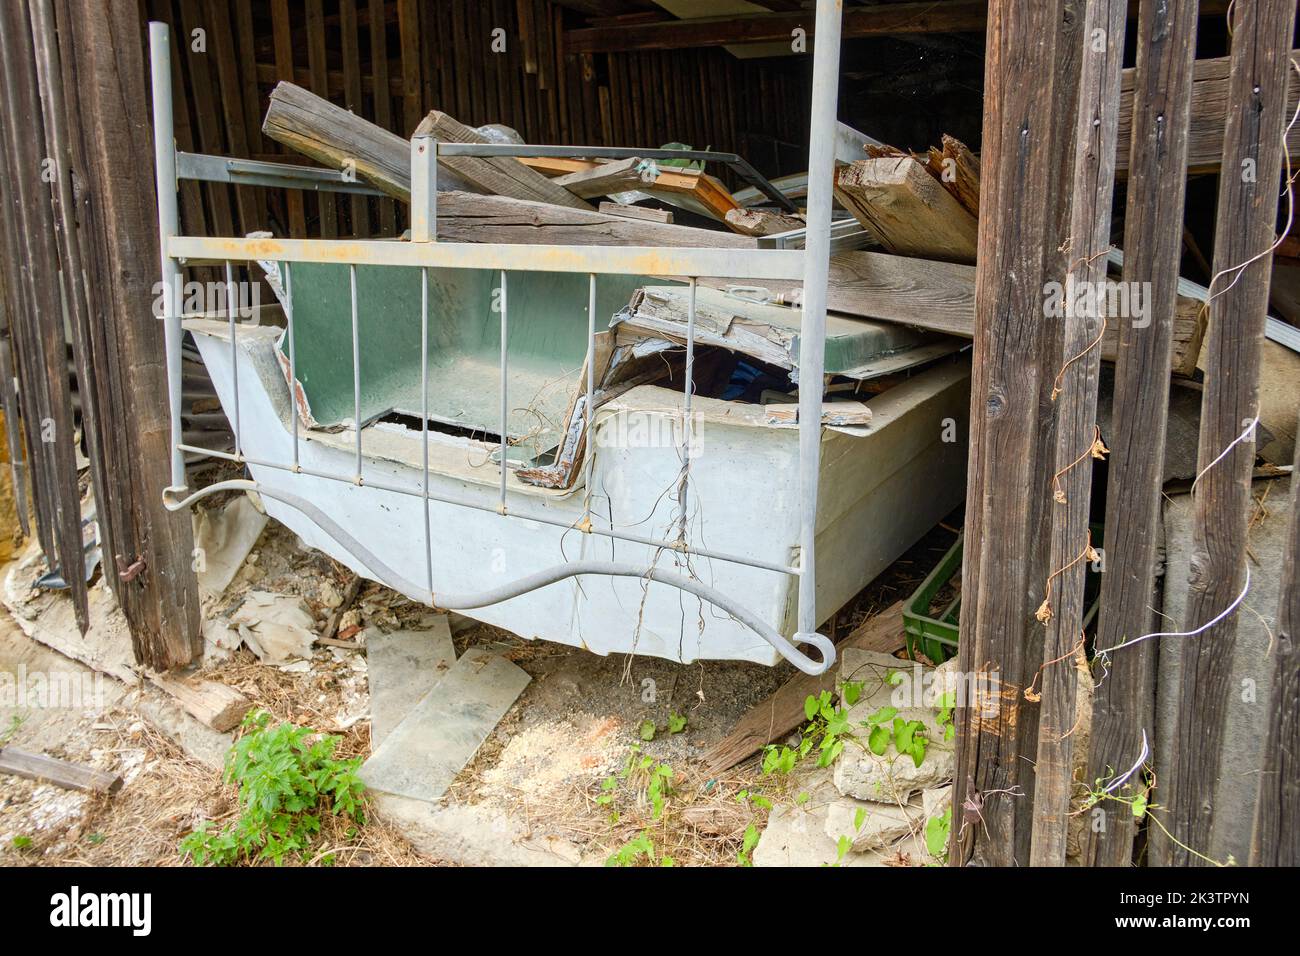 Neglected plastic boat full of junk in a derelict barn. Stock Photo